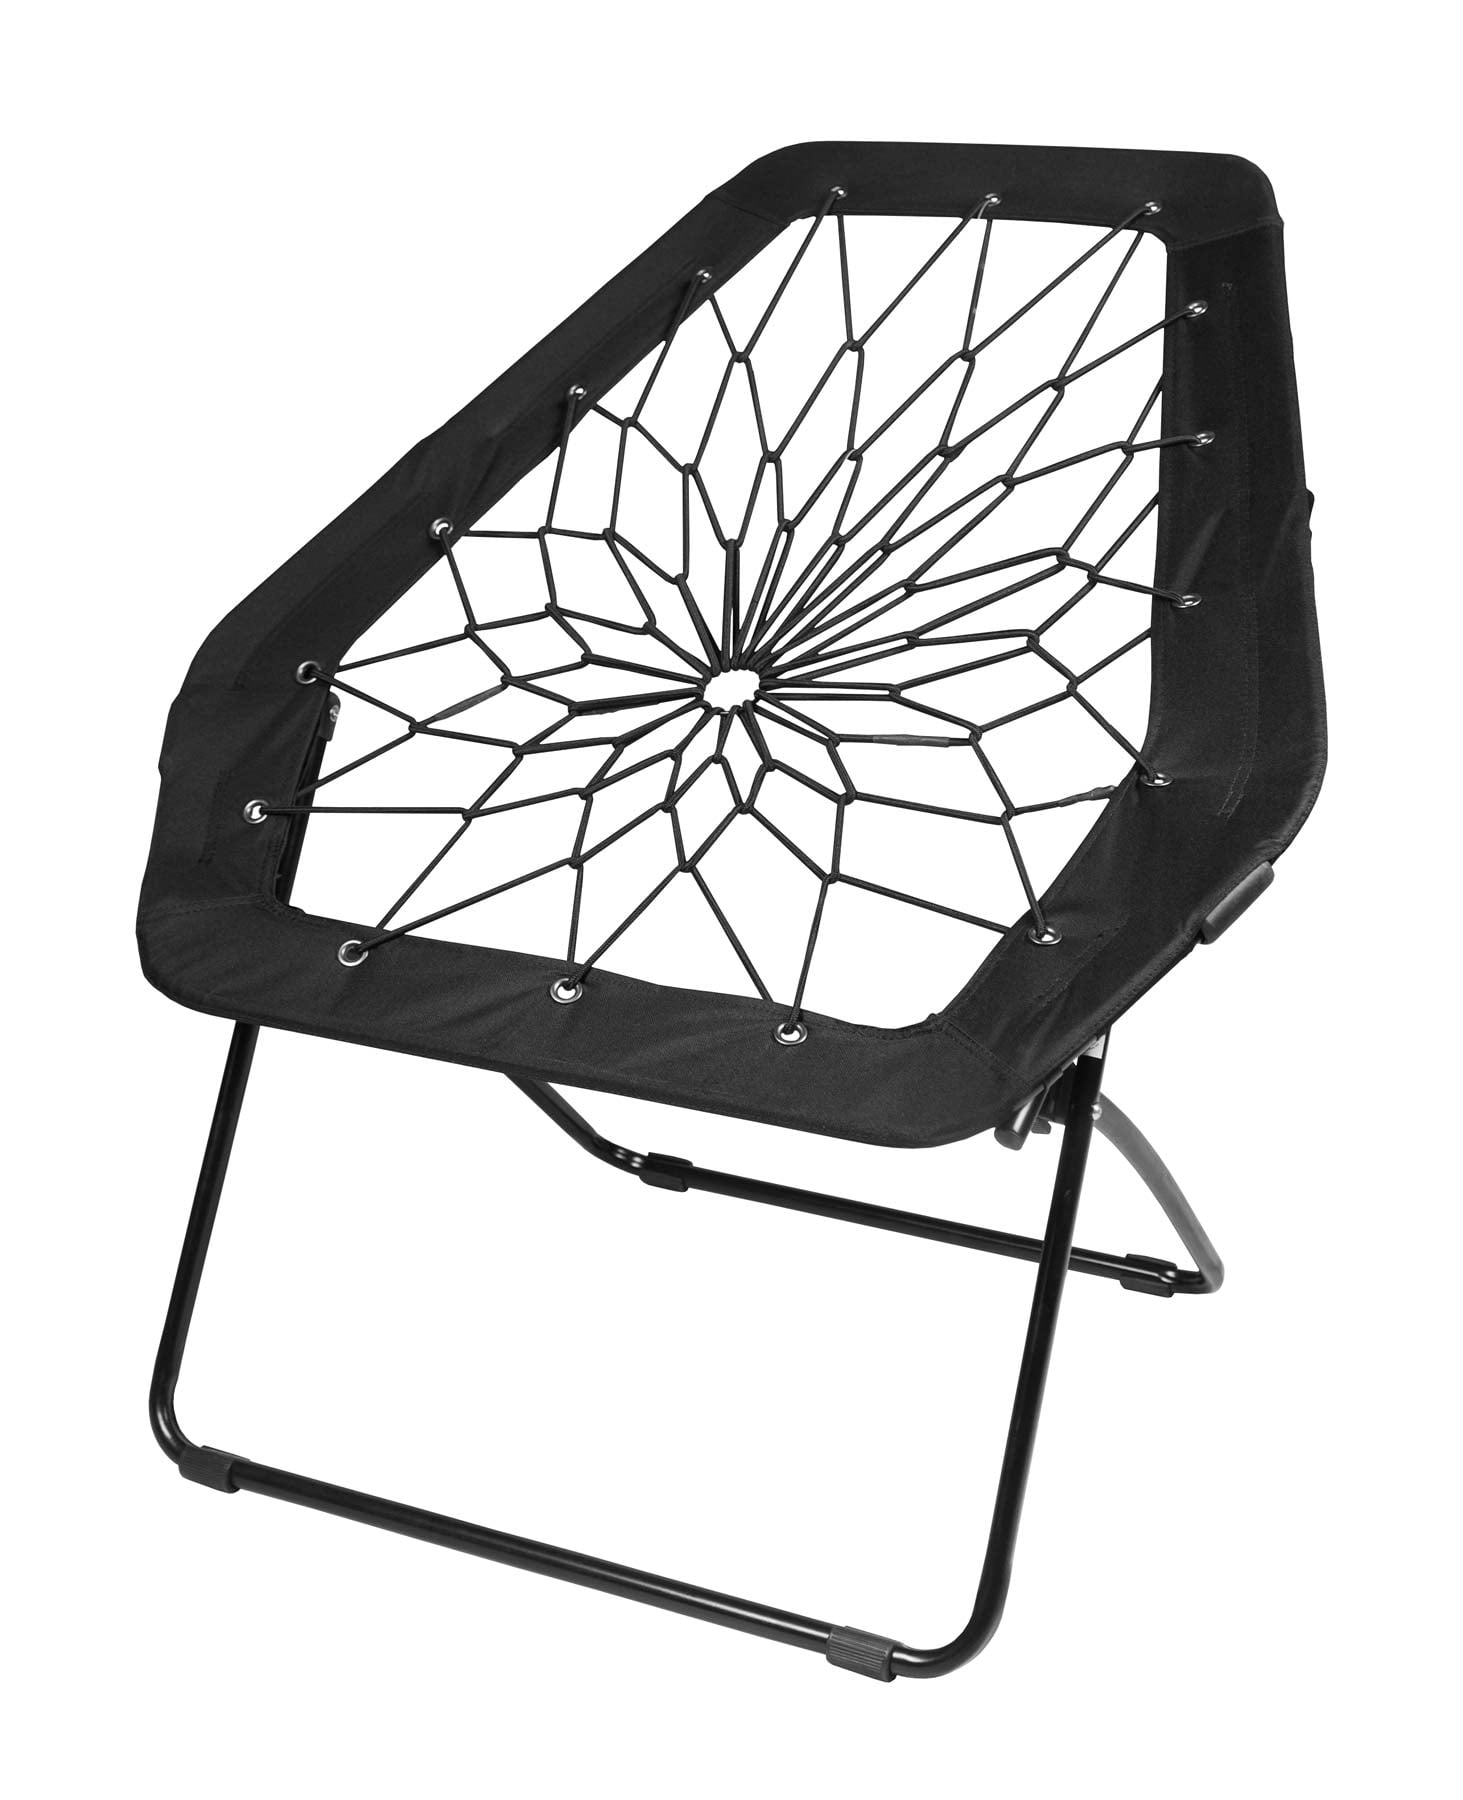 Details about   Fun And Flexible Bungee Chair Available in Multiple Colors USA Best Selling 